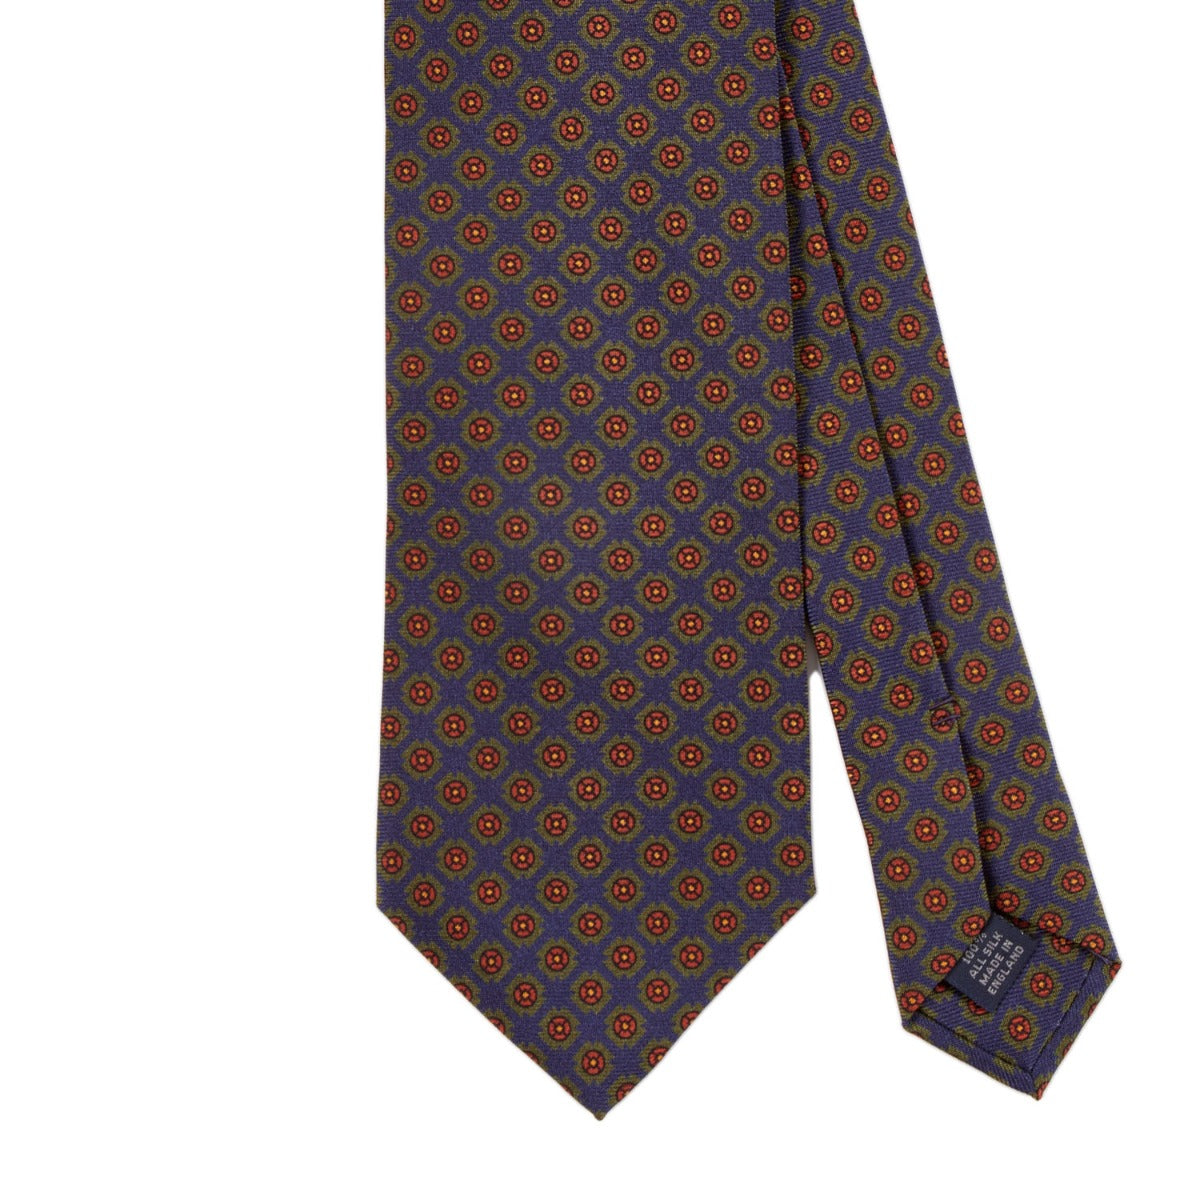 A Sovereign Grade Deco Square Printed Silk Tie designed by KirbyAllison.com in a brown and orange geometric pattern.